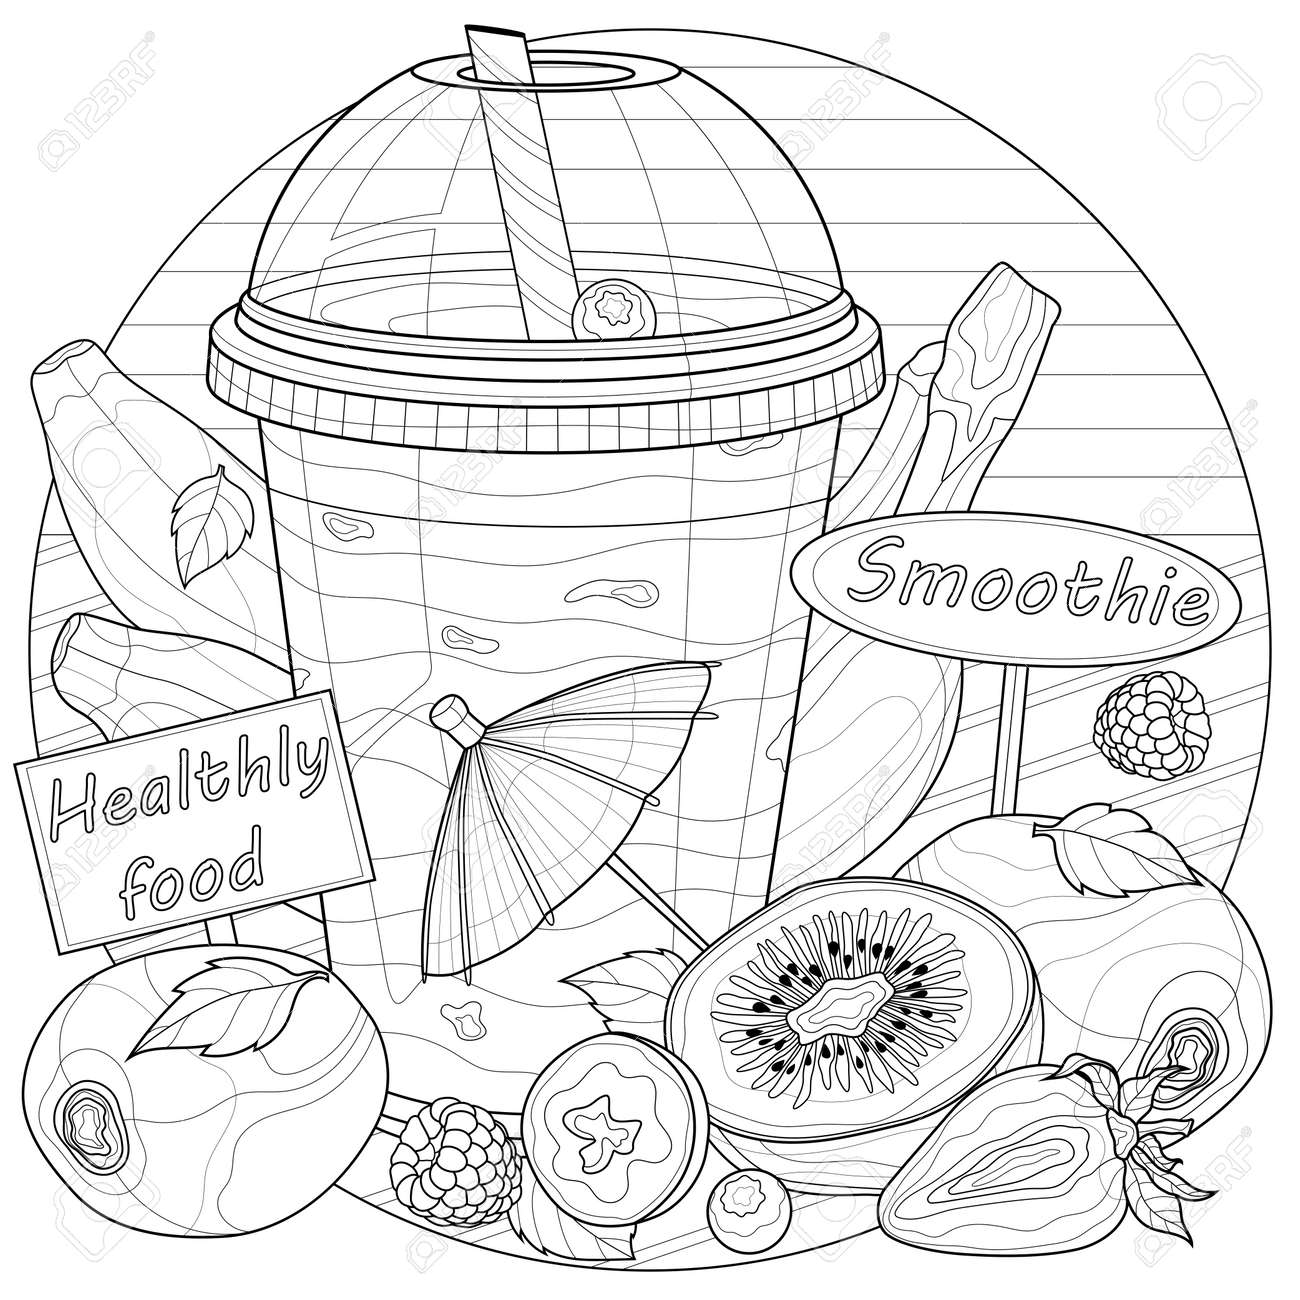 Fruit smoothiecoloring book antistress for children and adults illustration isolated on white backgroundzen